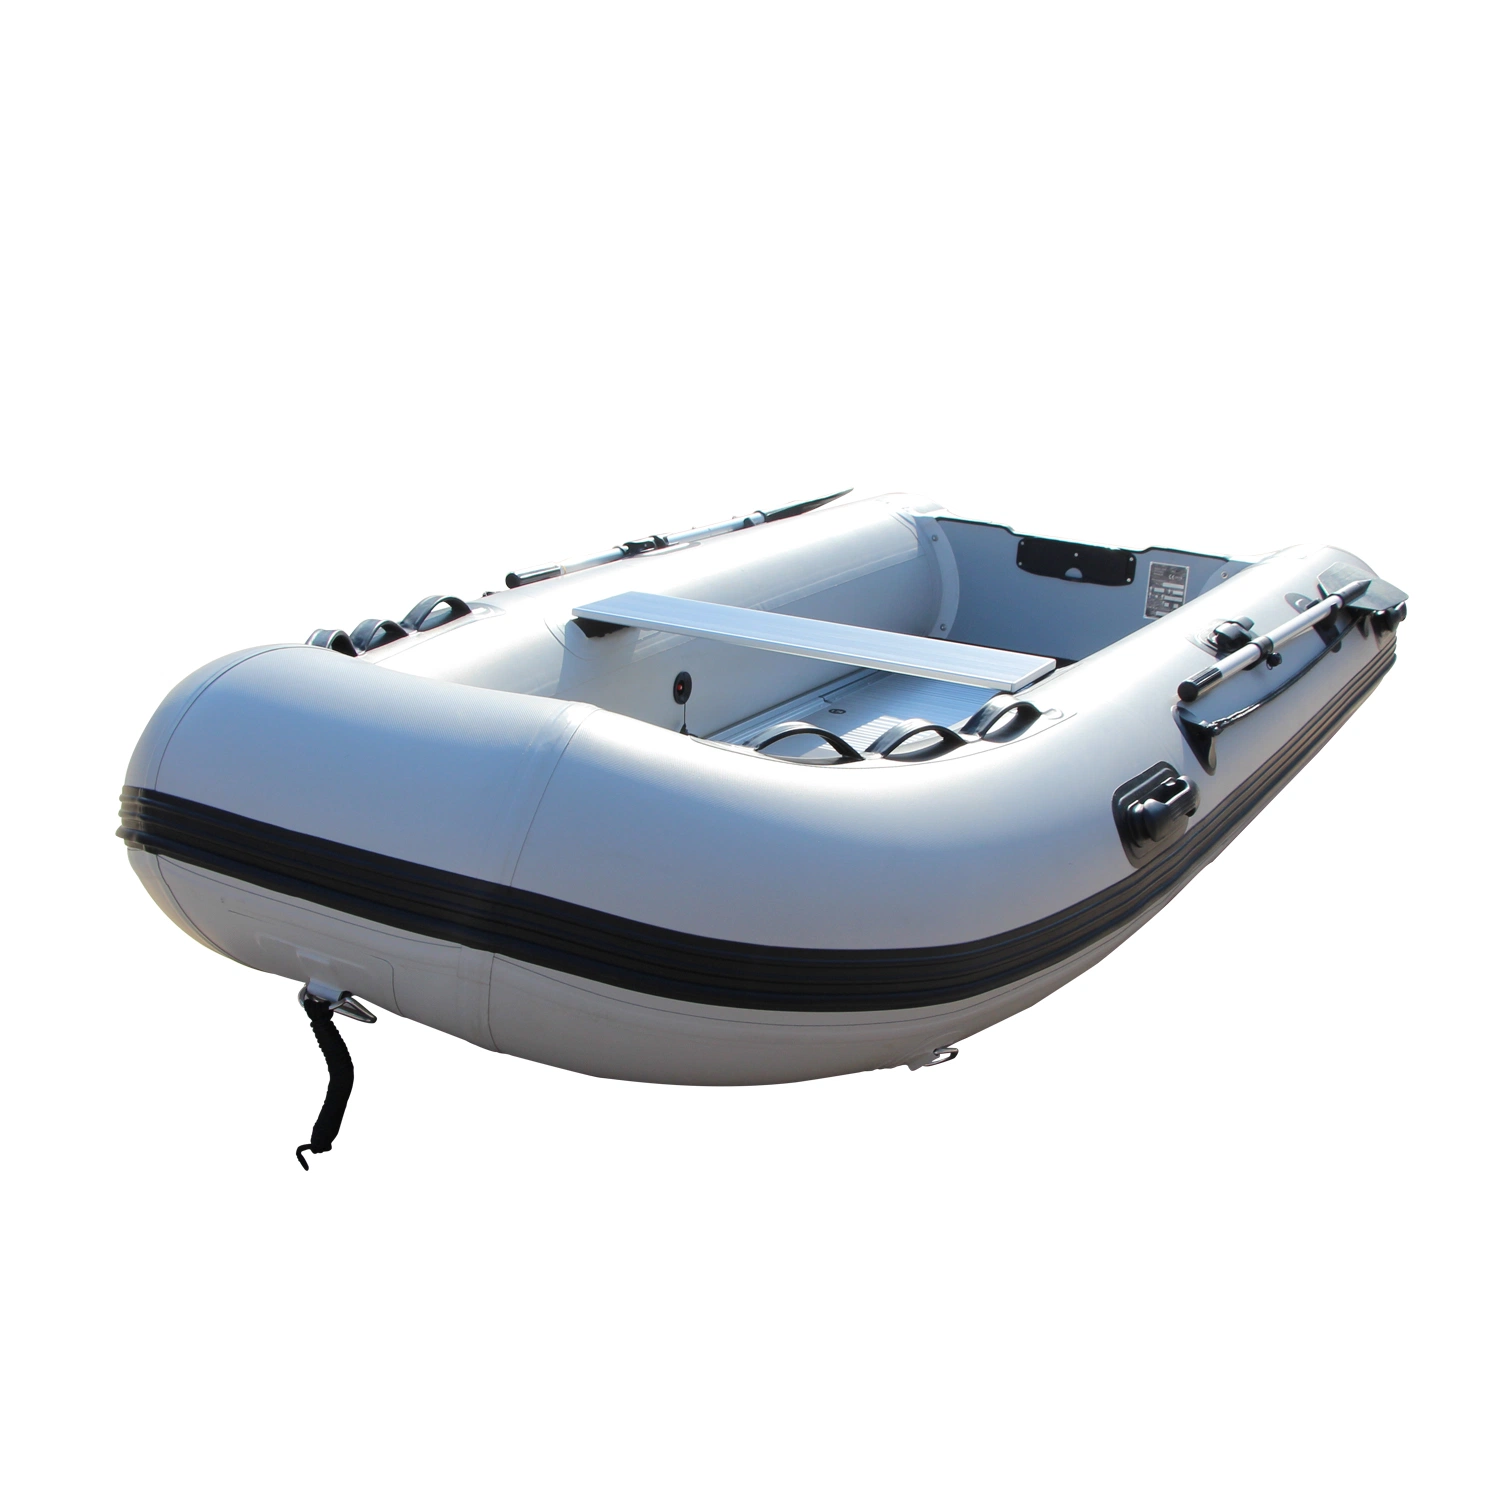 3,3M Calidad Rafting/aluminio/Deporte inflable barco